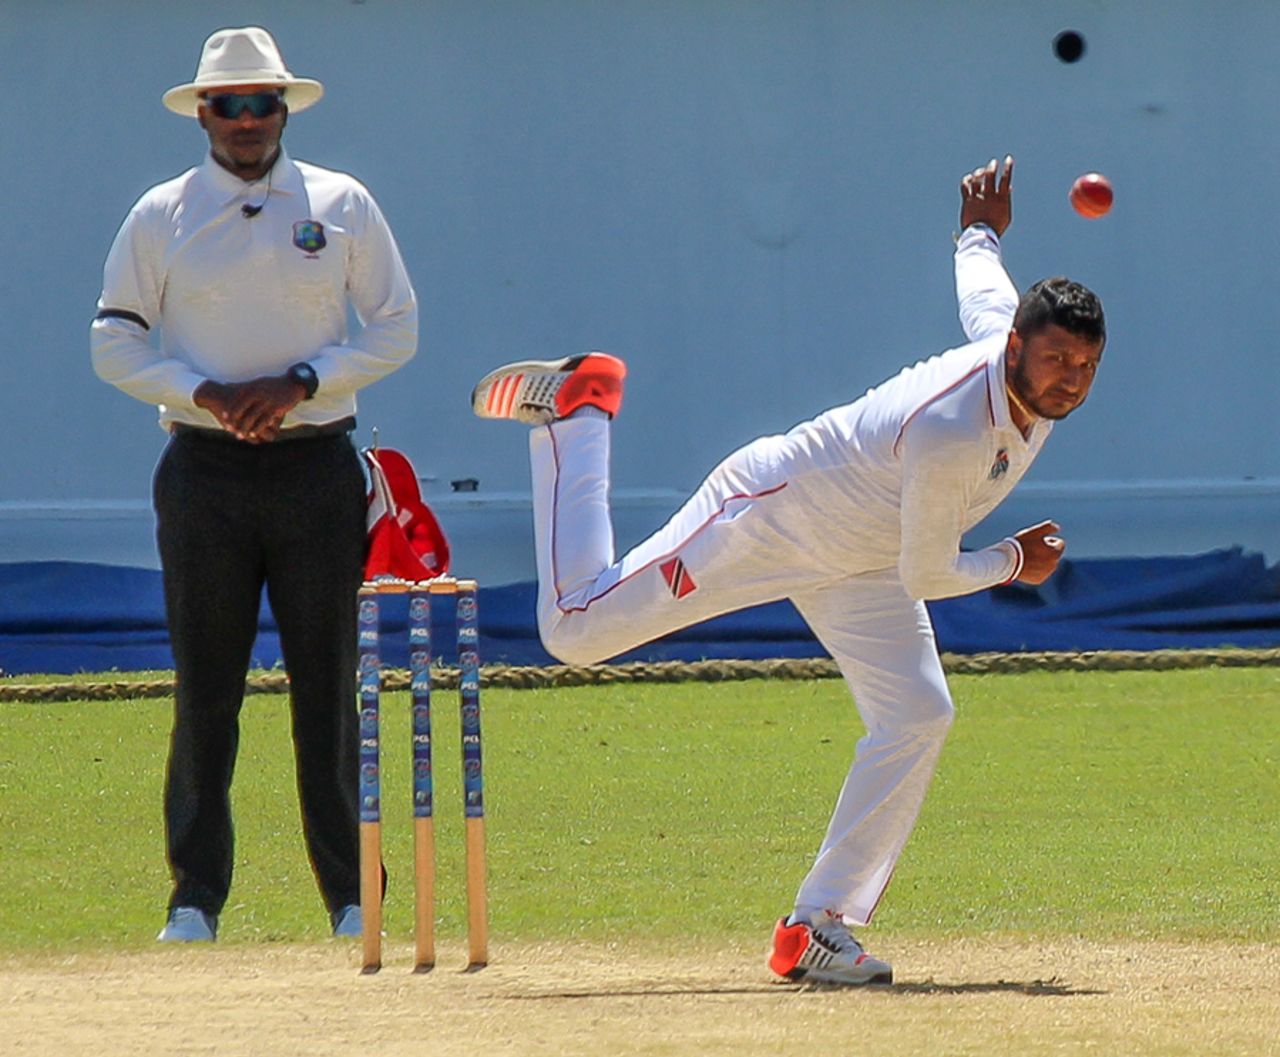 Jon-Russ Jaggesar in his delivery stride, Jamaica v Trinidad & Tobago, Regional 4-Day Tournament, 3rd day, Kingston, February 21, 2016